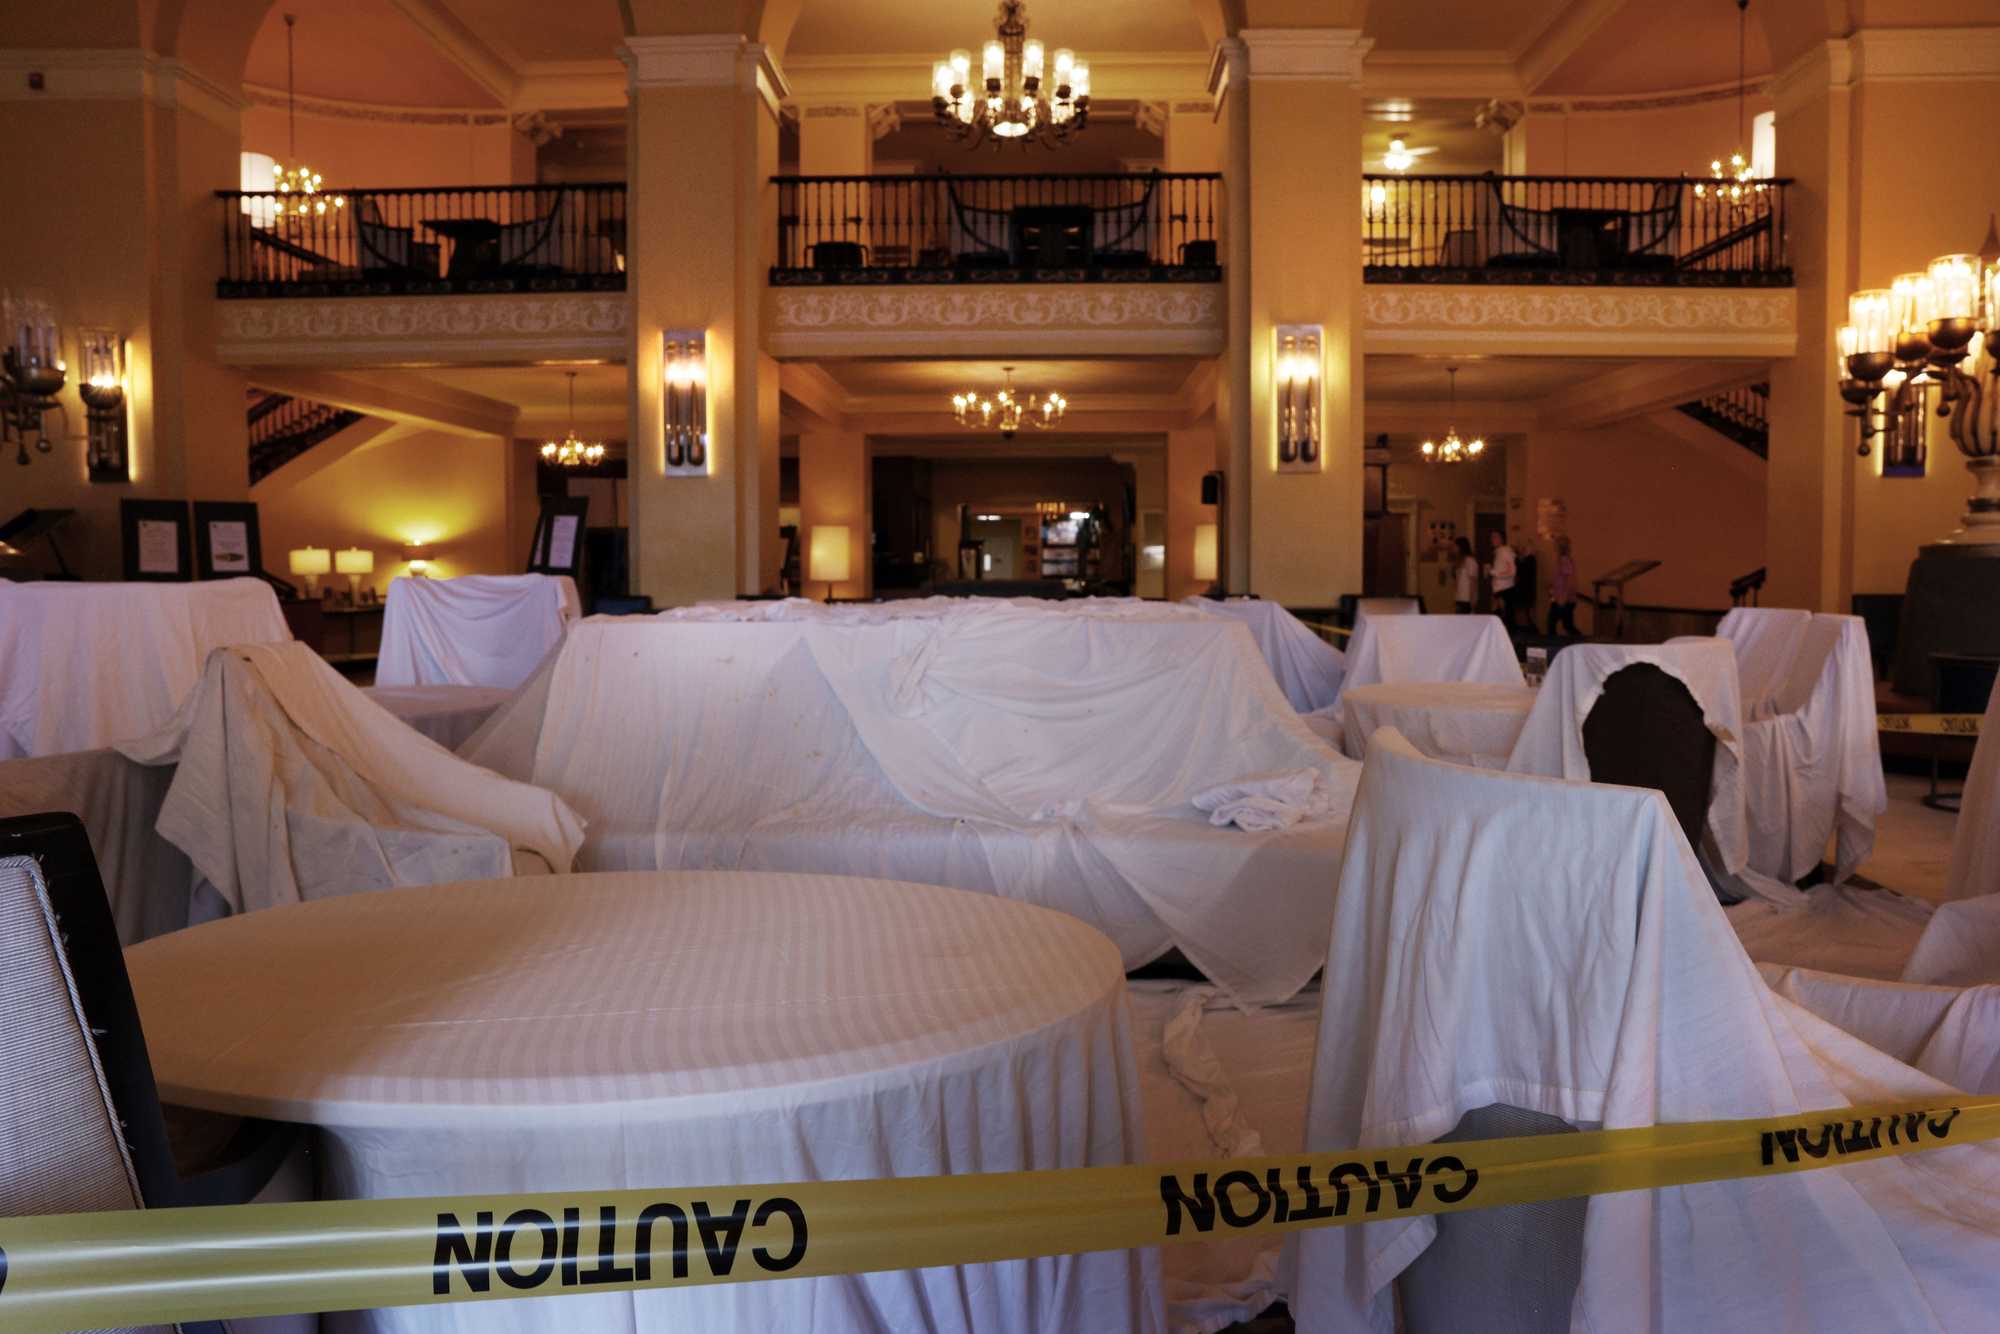 The lobby of the Arlington Hotel was undergoing renovations in early September, so the lobby slightly resembled a crime scene. 